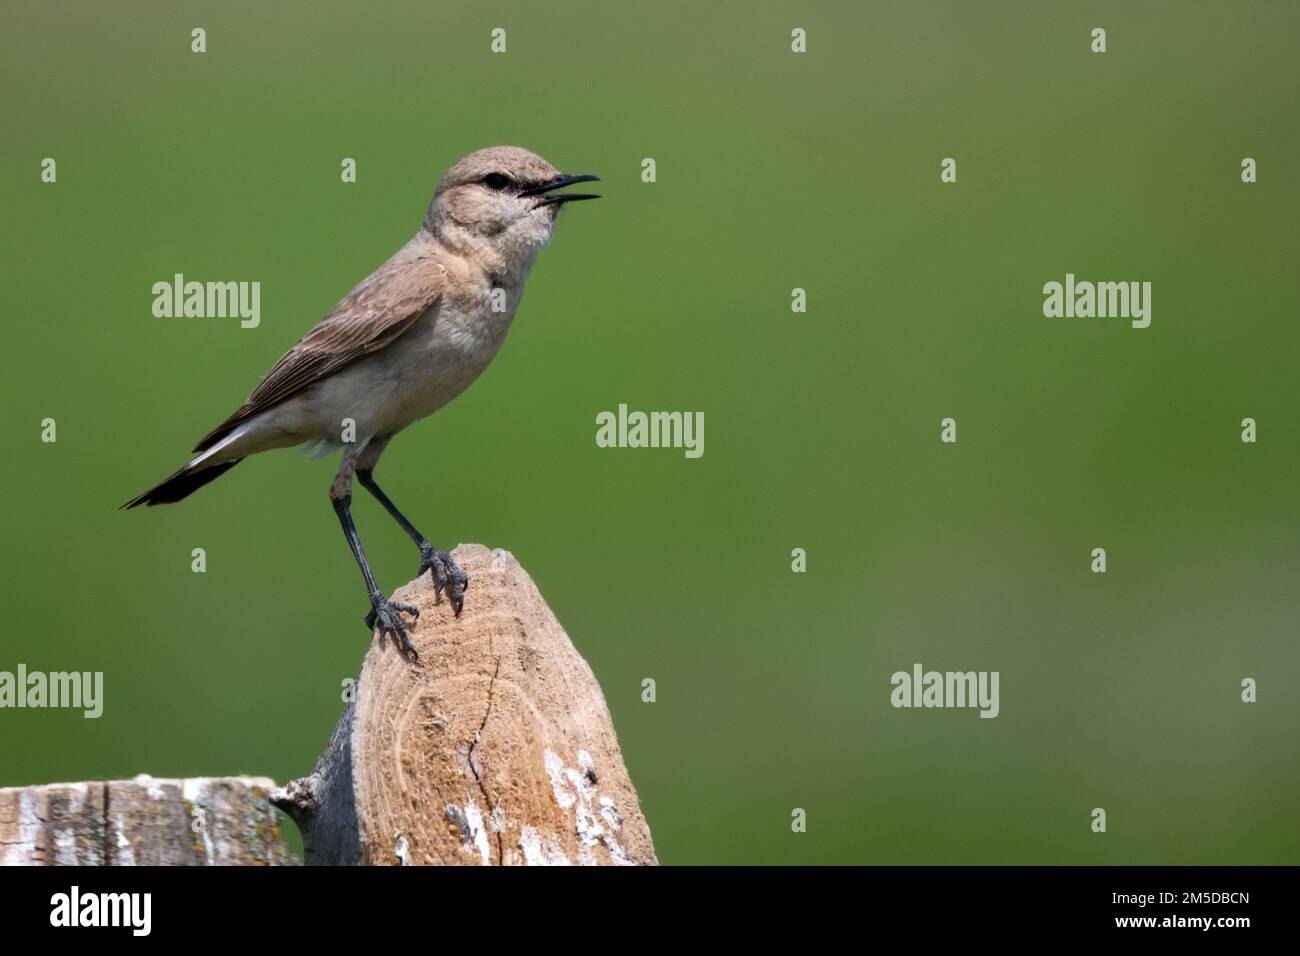 Isabelline Wheatear or Oenanthe isabellina in wild Stock Photo